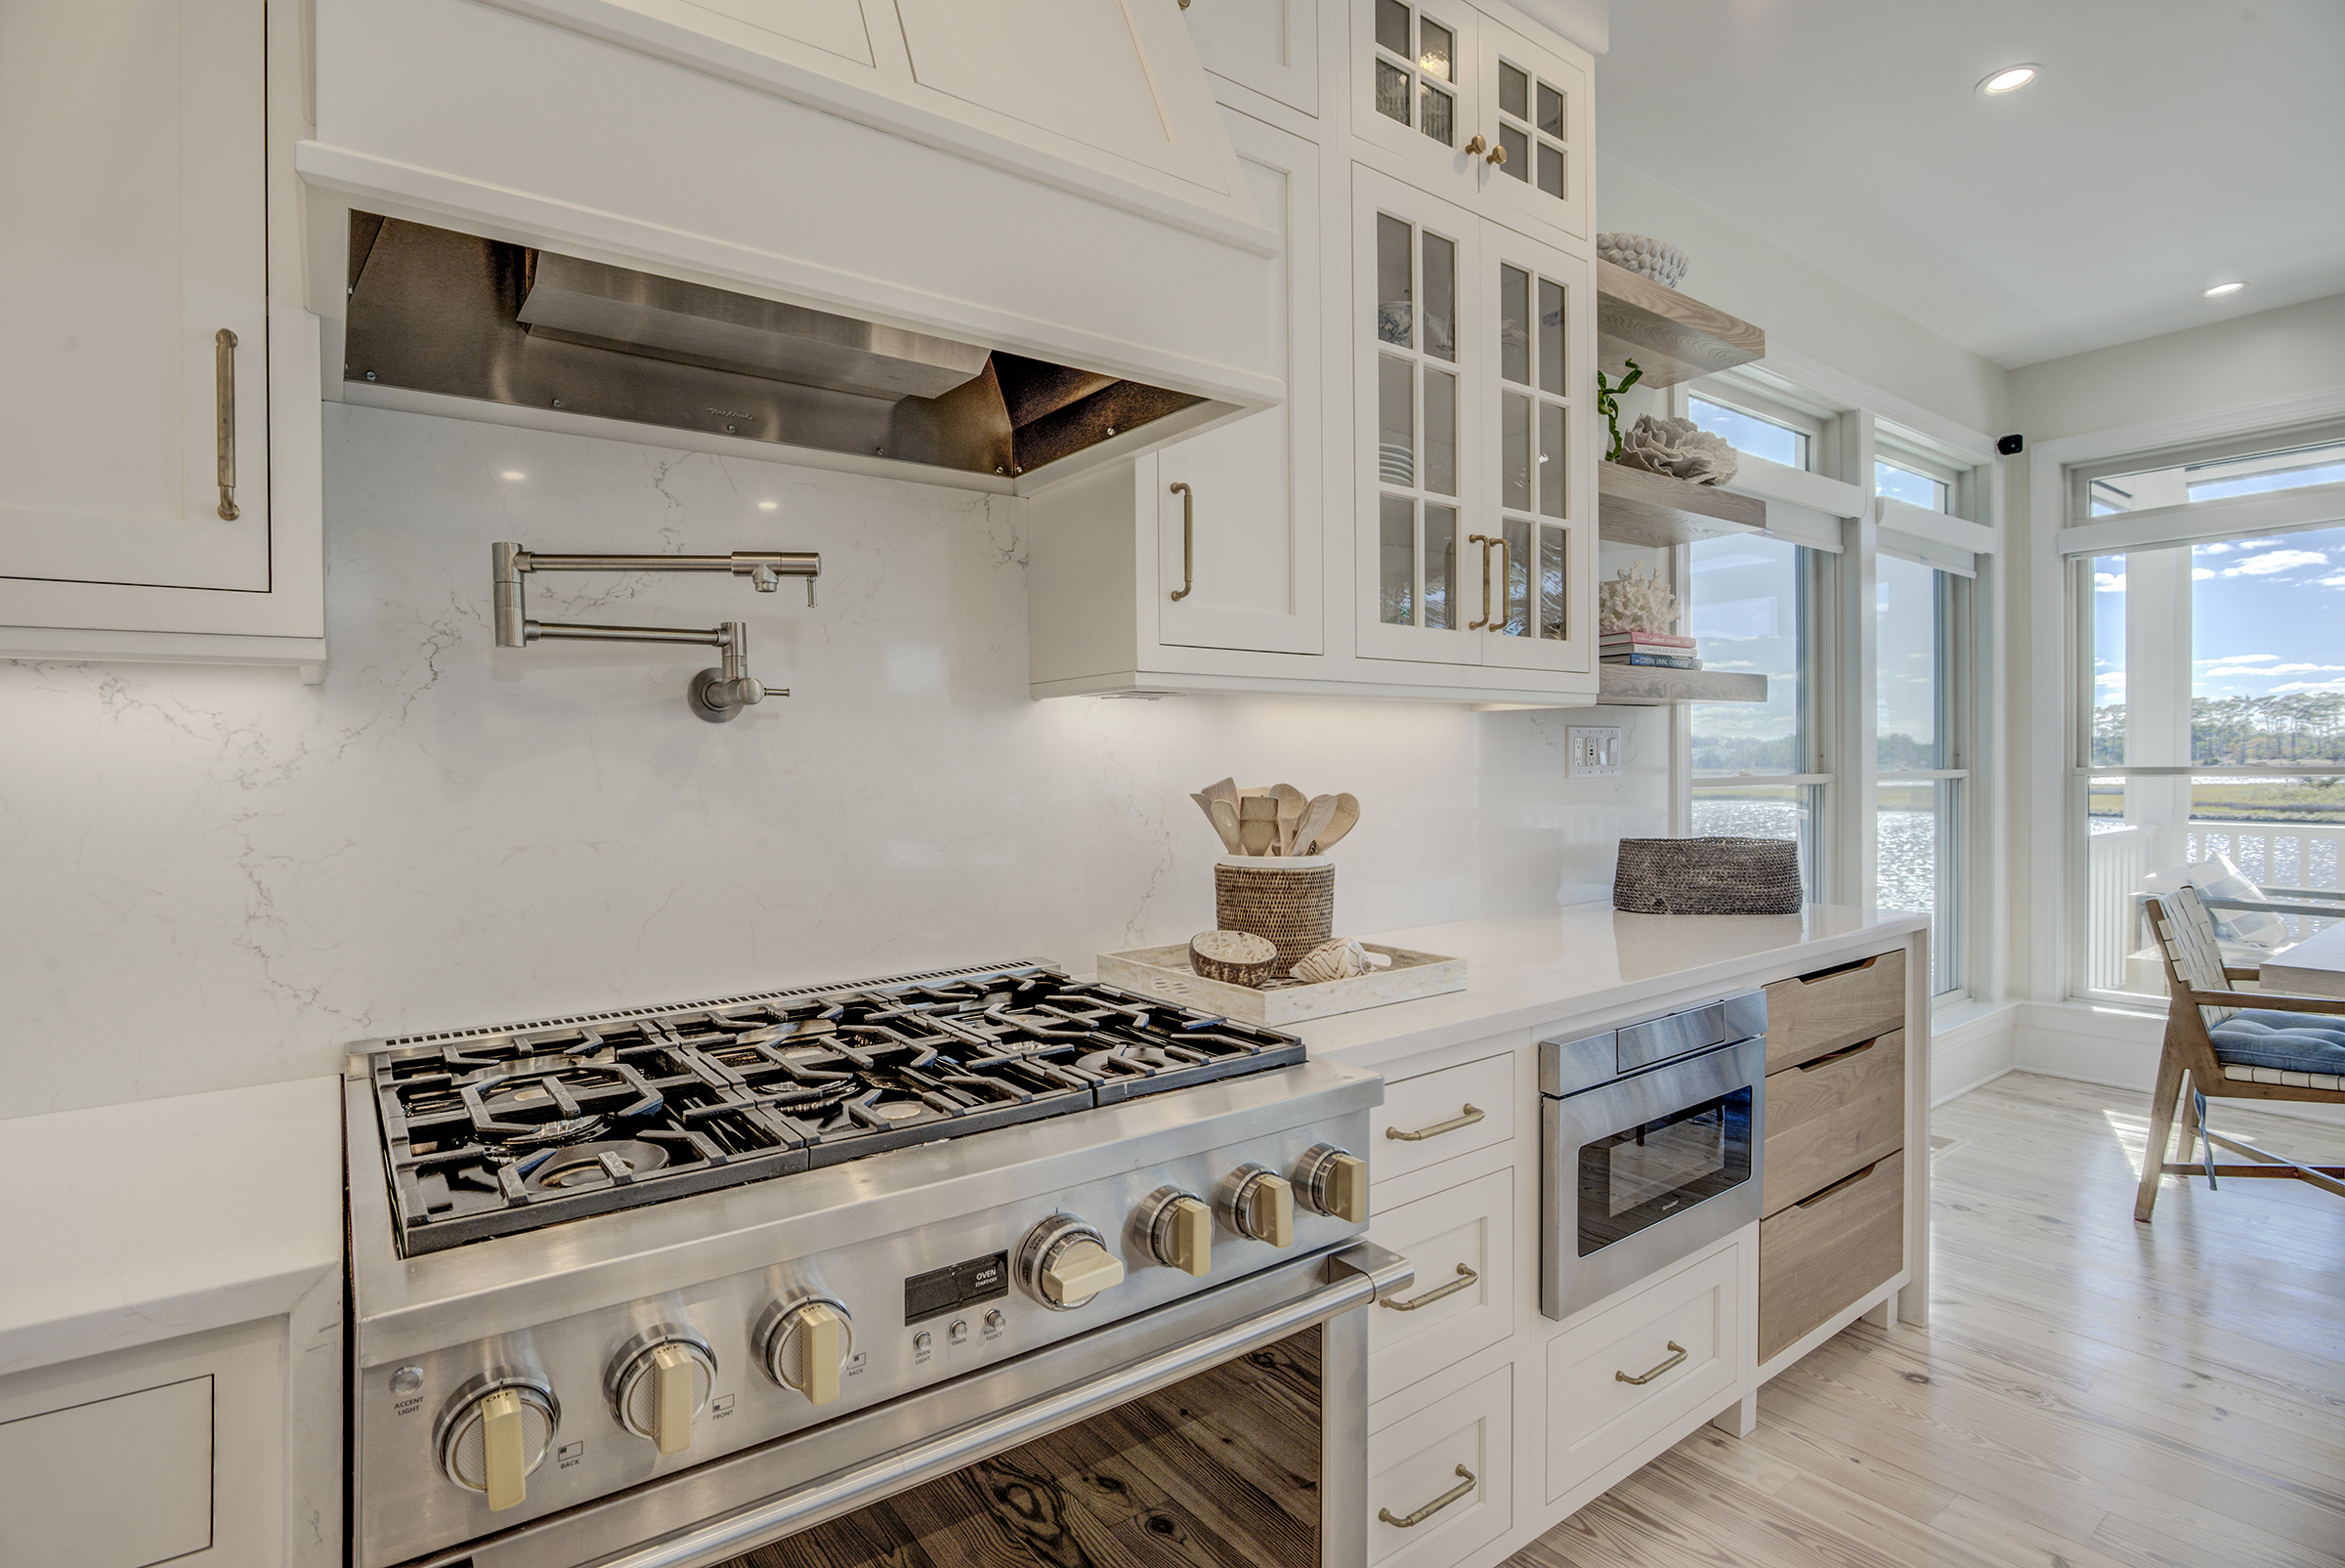 Sea Light Design-Build Pine Road Kitchen Renovation in Selbyville Delaware - clean lines, flush cabinet fronts, and more add to this modern design